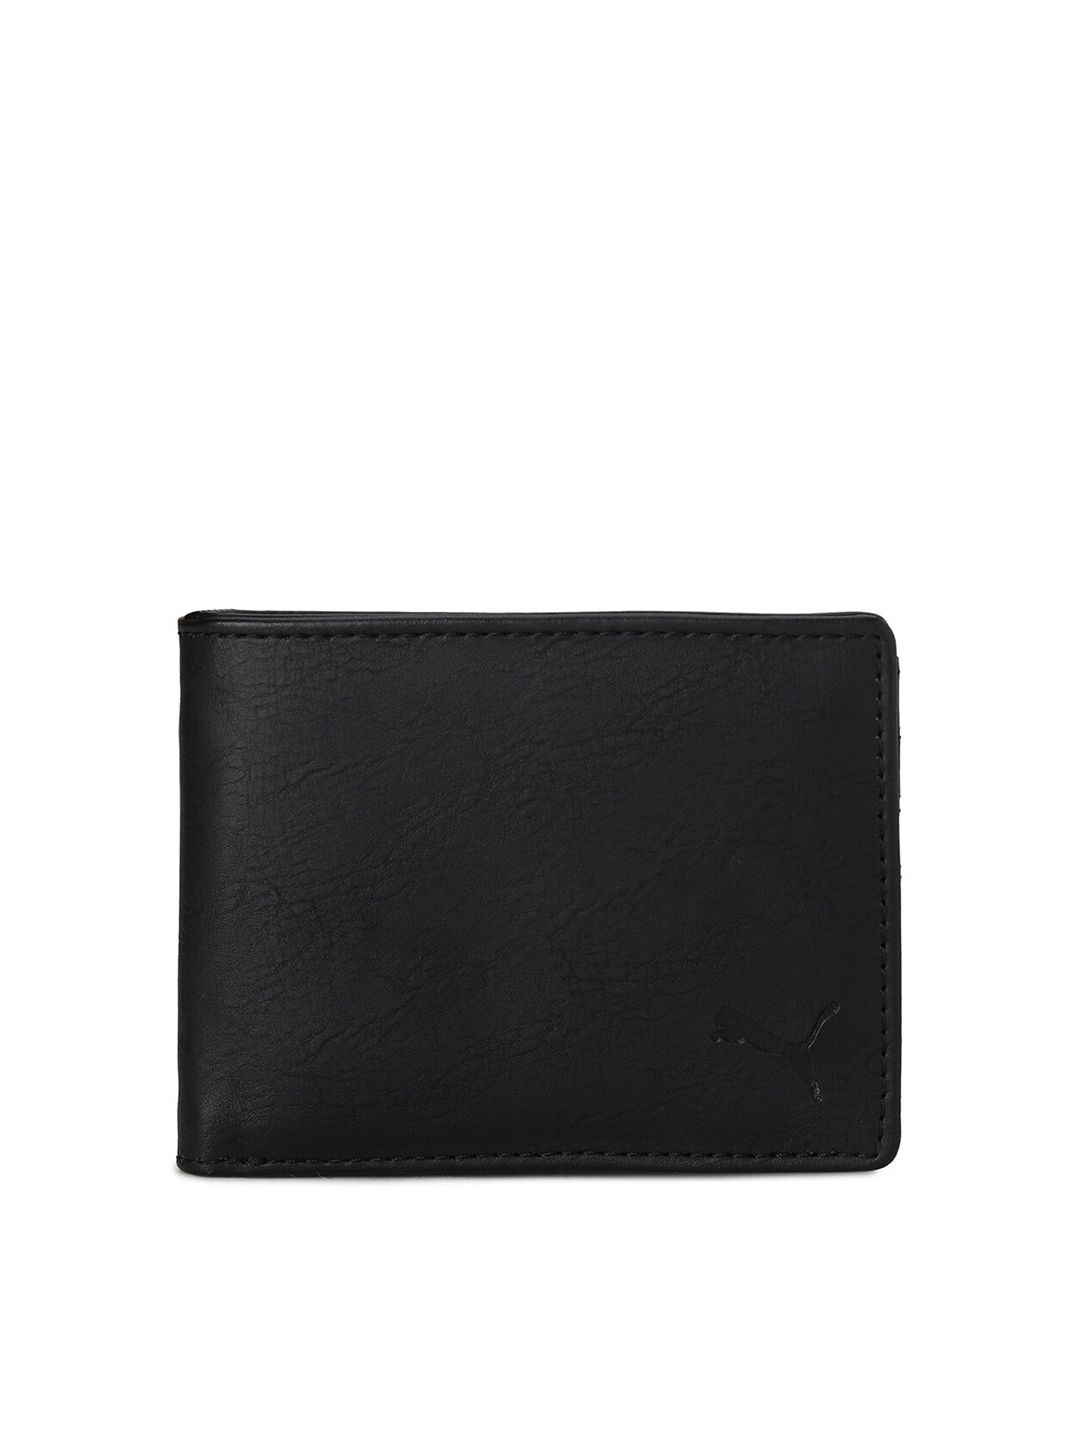 Puma Unisex Black Two Fold Wallet Price in India